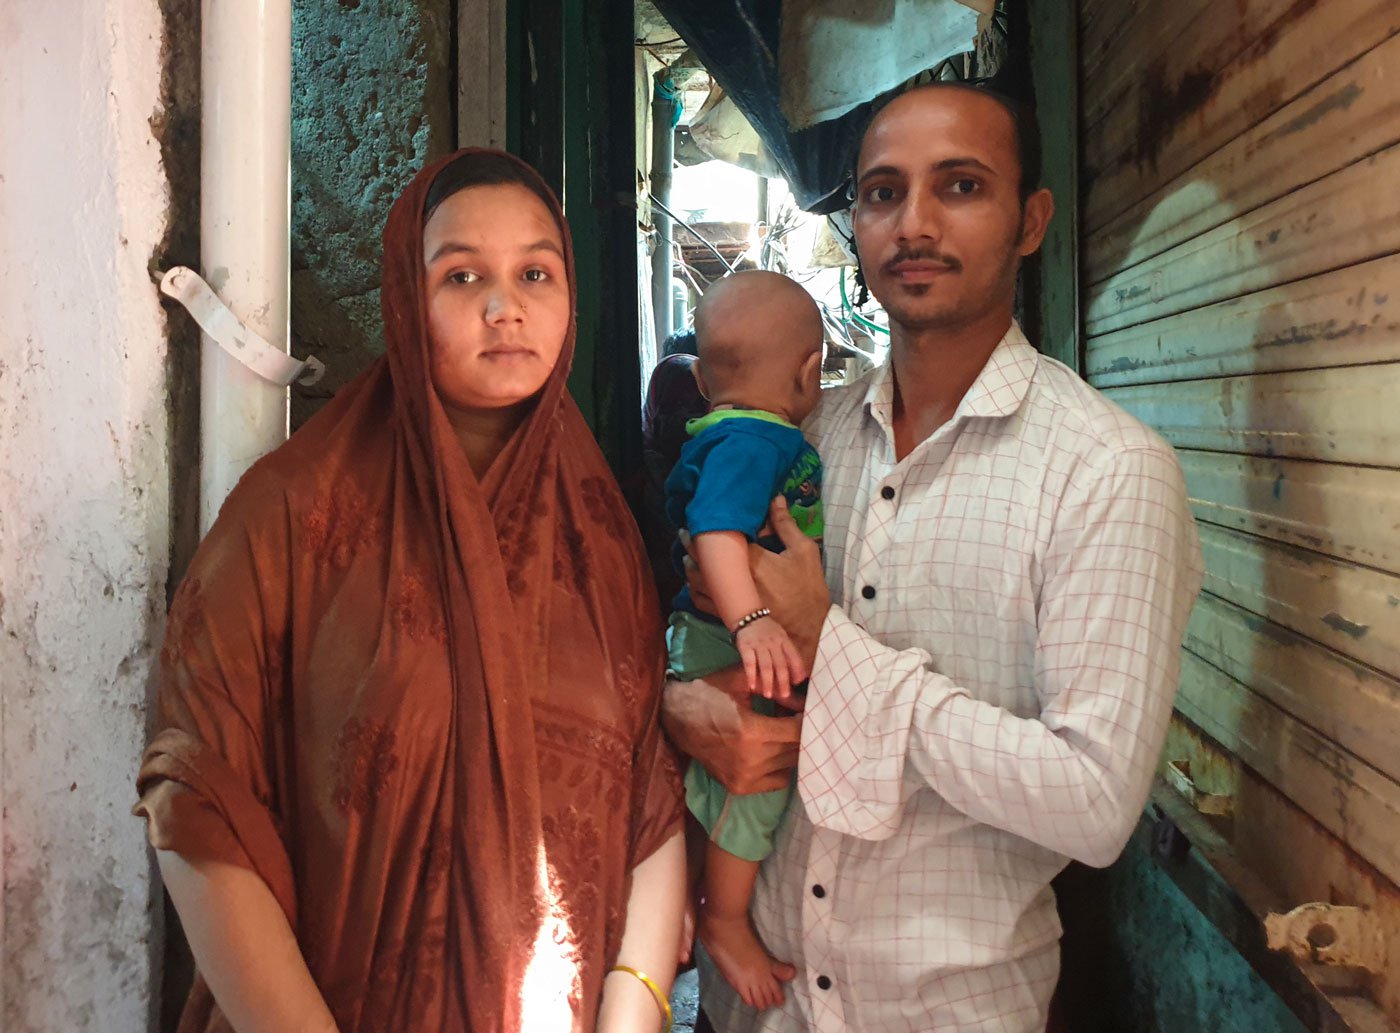 Mohammed Shamim, Gausiya and their son: 'If we get one seat, we’ll board and then pay whatever fine or penalty is charged'